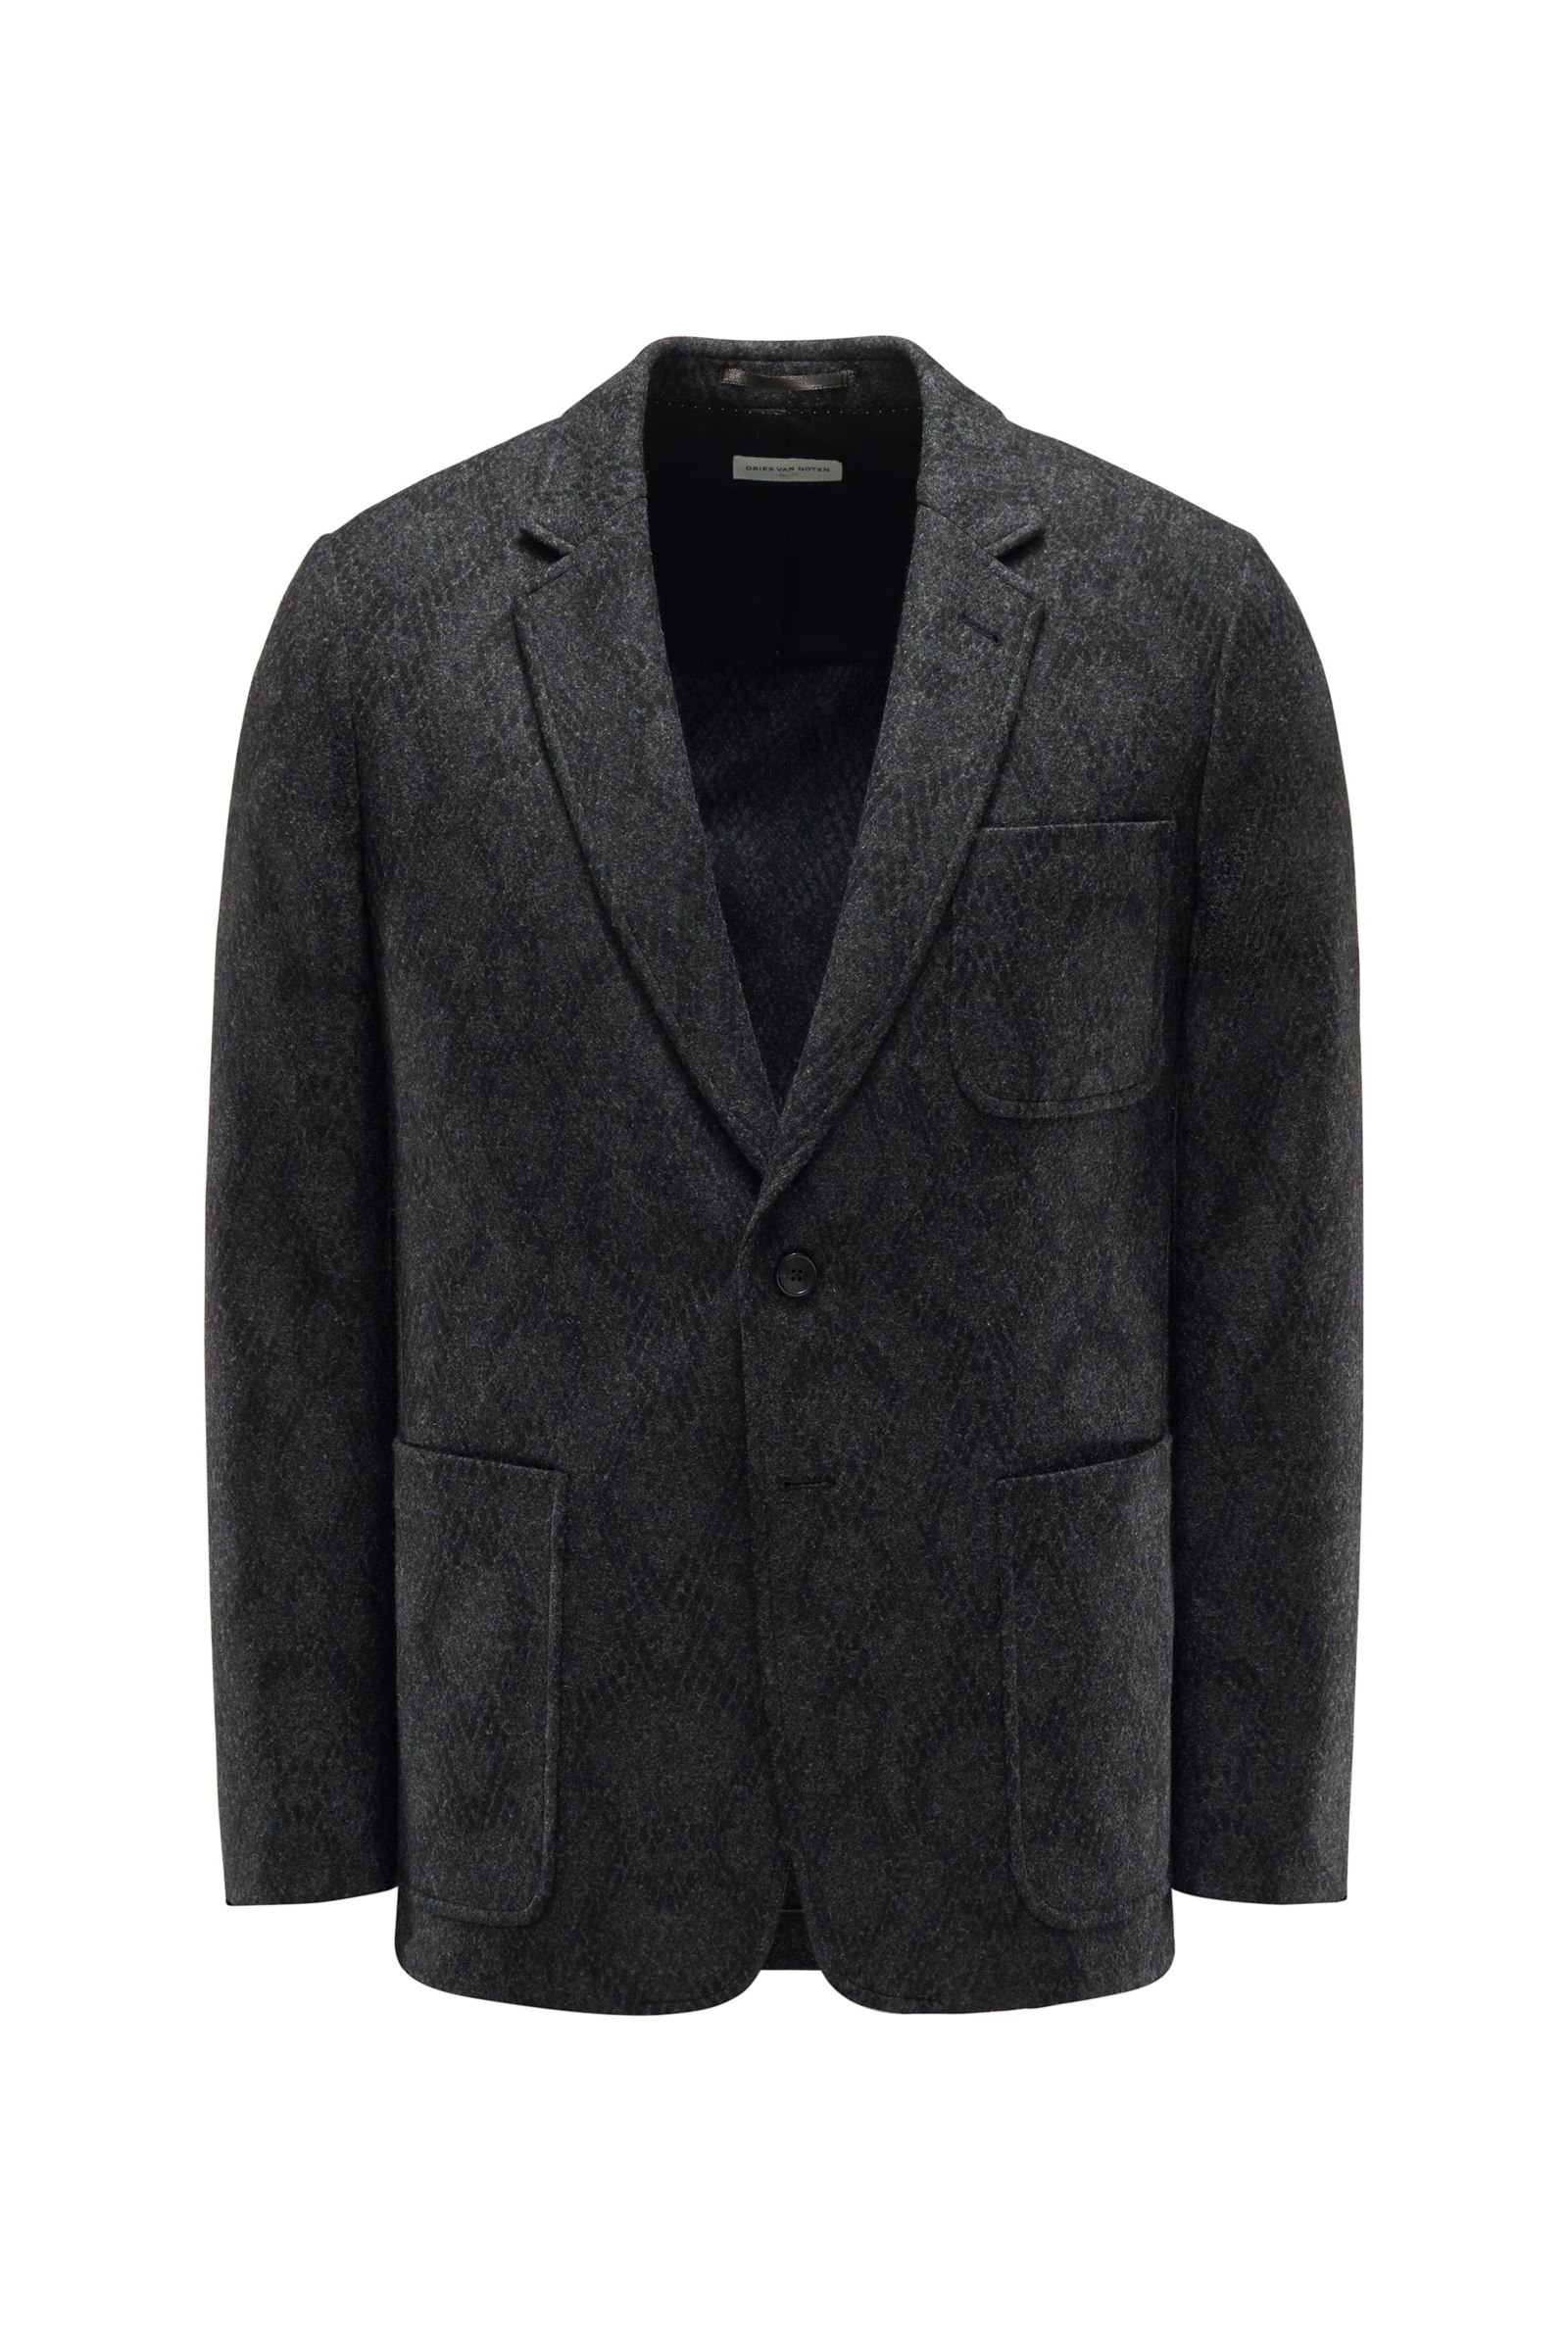 Smart-casual jacket 'Brody' anthracite patterned